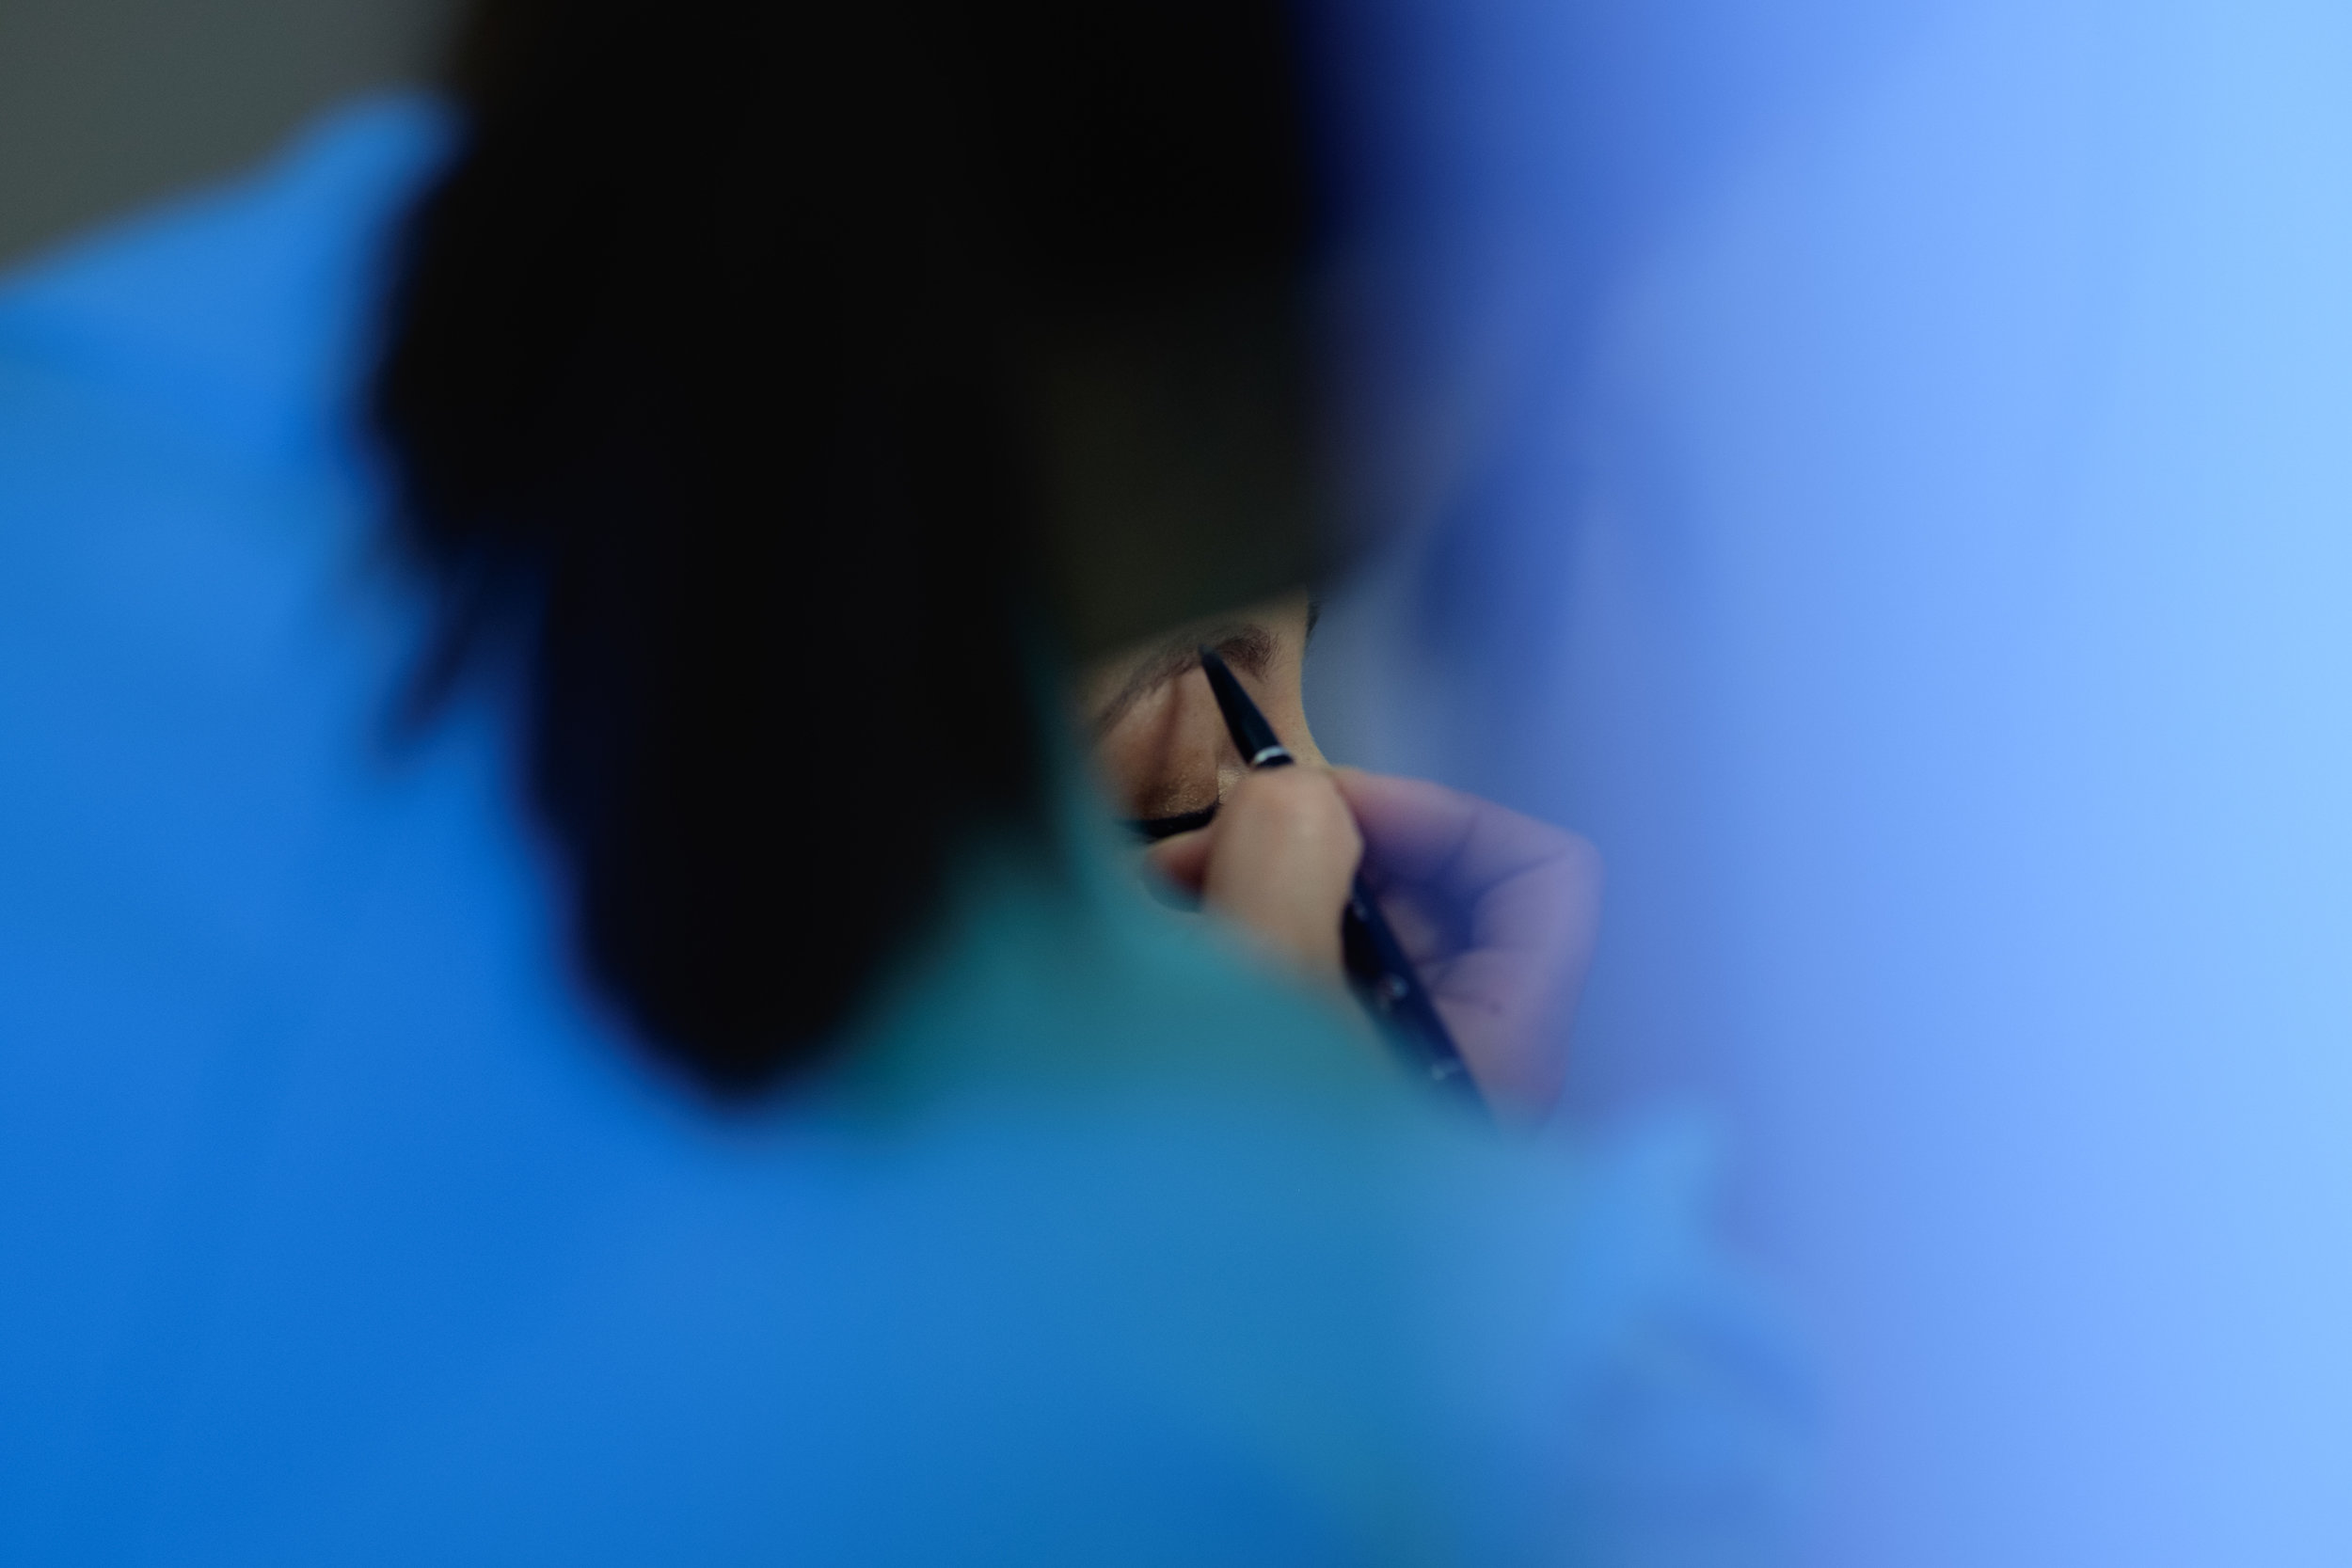  Sometimes you have to go a little abstract... this one is from Jing + Rene's backyard wedding in Toronto as Jing has her makeup done. 